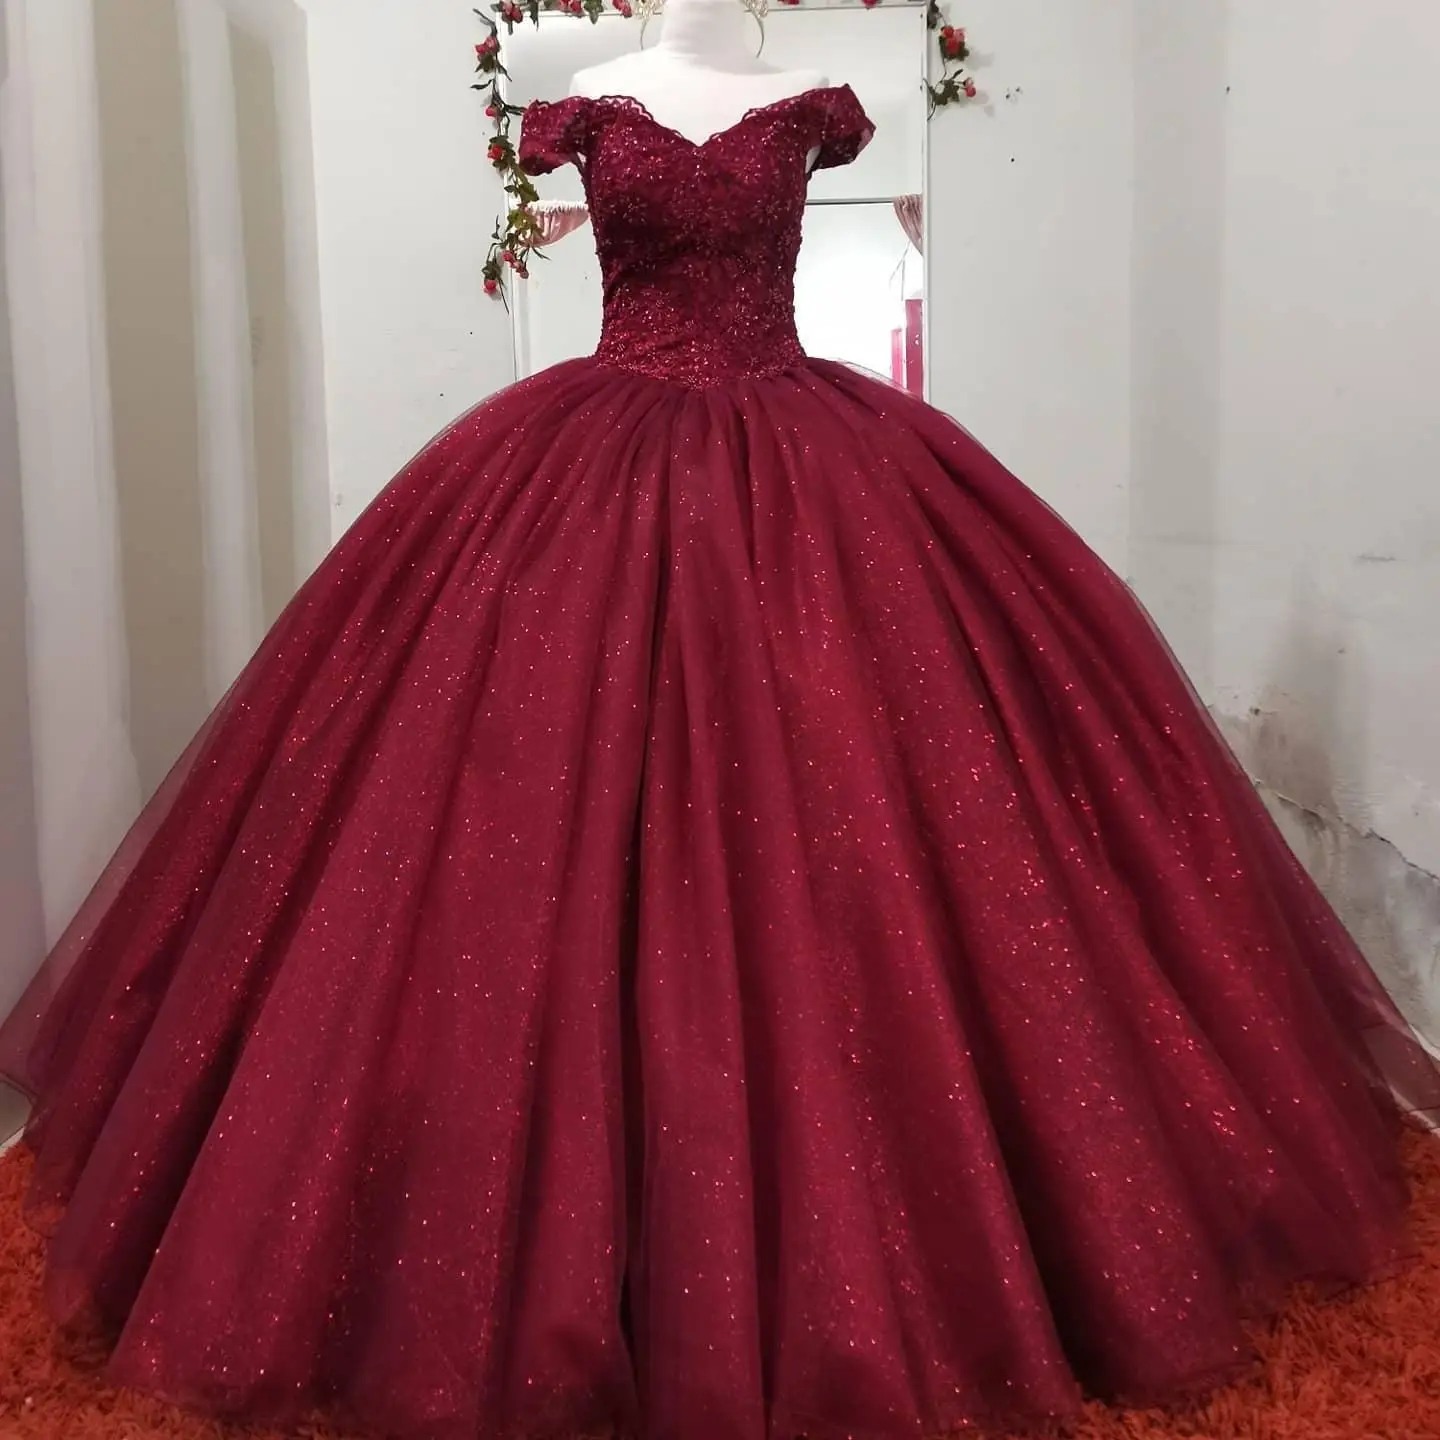 

Sparkly Burgundy Quinceanera Dresses Fashion Applique Tulle Formal Princess 15 Party Birthday Gowns Hot Sale